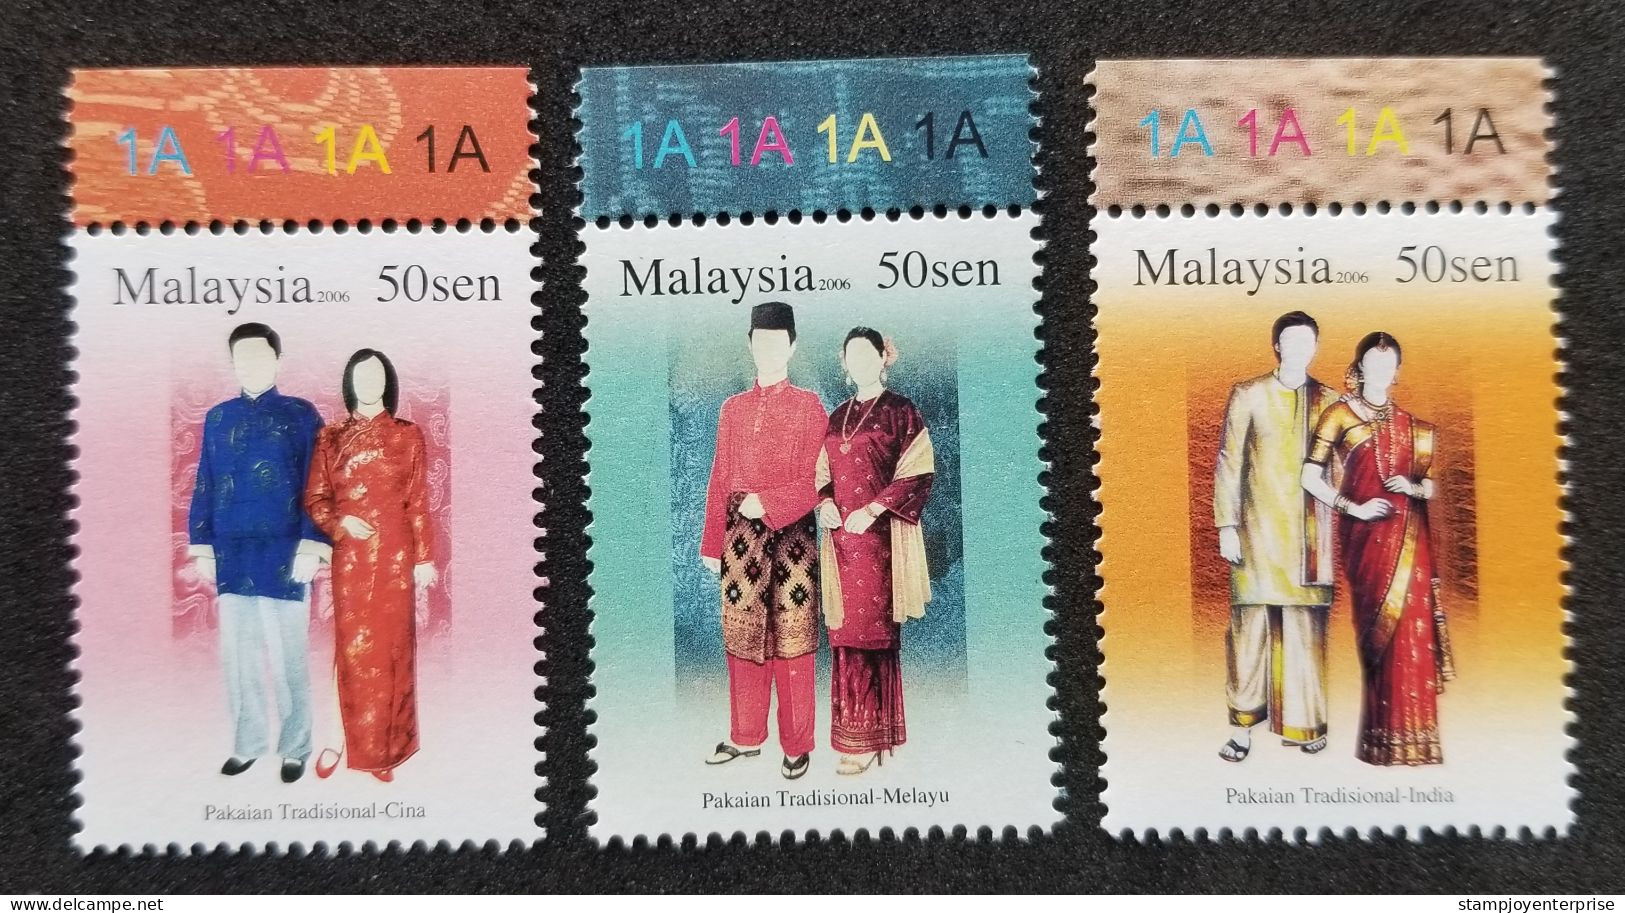 Malaysia Traditional Costumes 2006 Attire Costume Culture Cloth Art Chinese India Malay (stamp Plate) MNH - Malesia (1964-...)